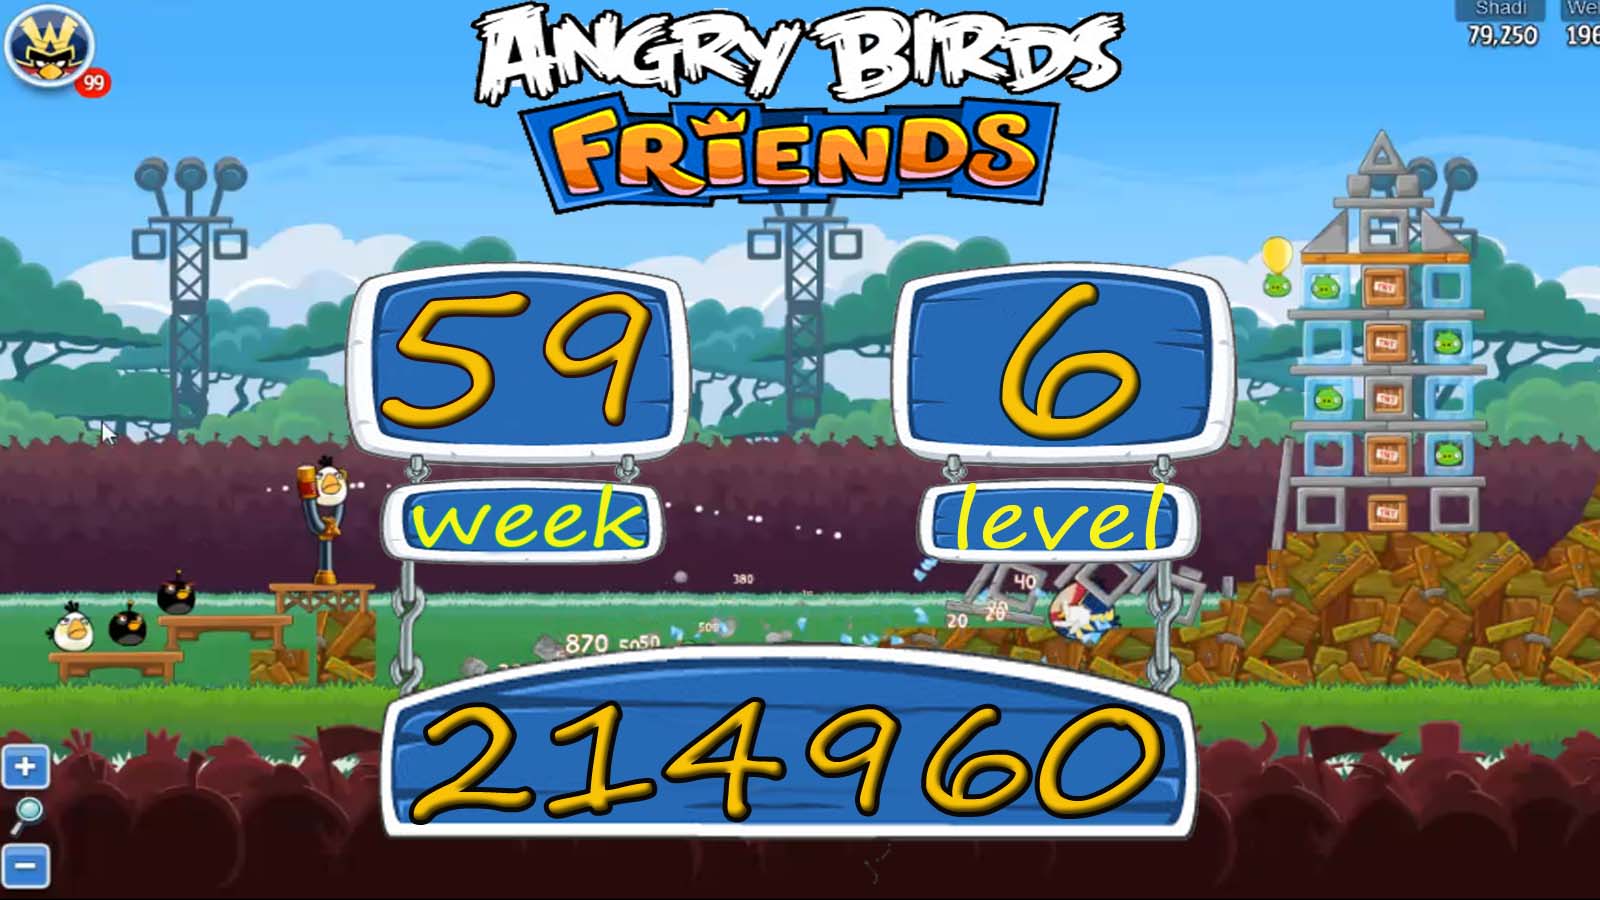 angry birds friends 2018 tournament 305-a